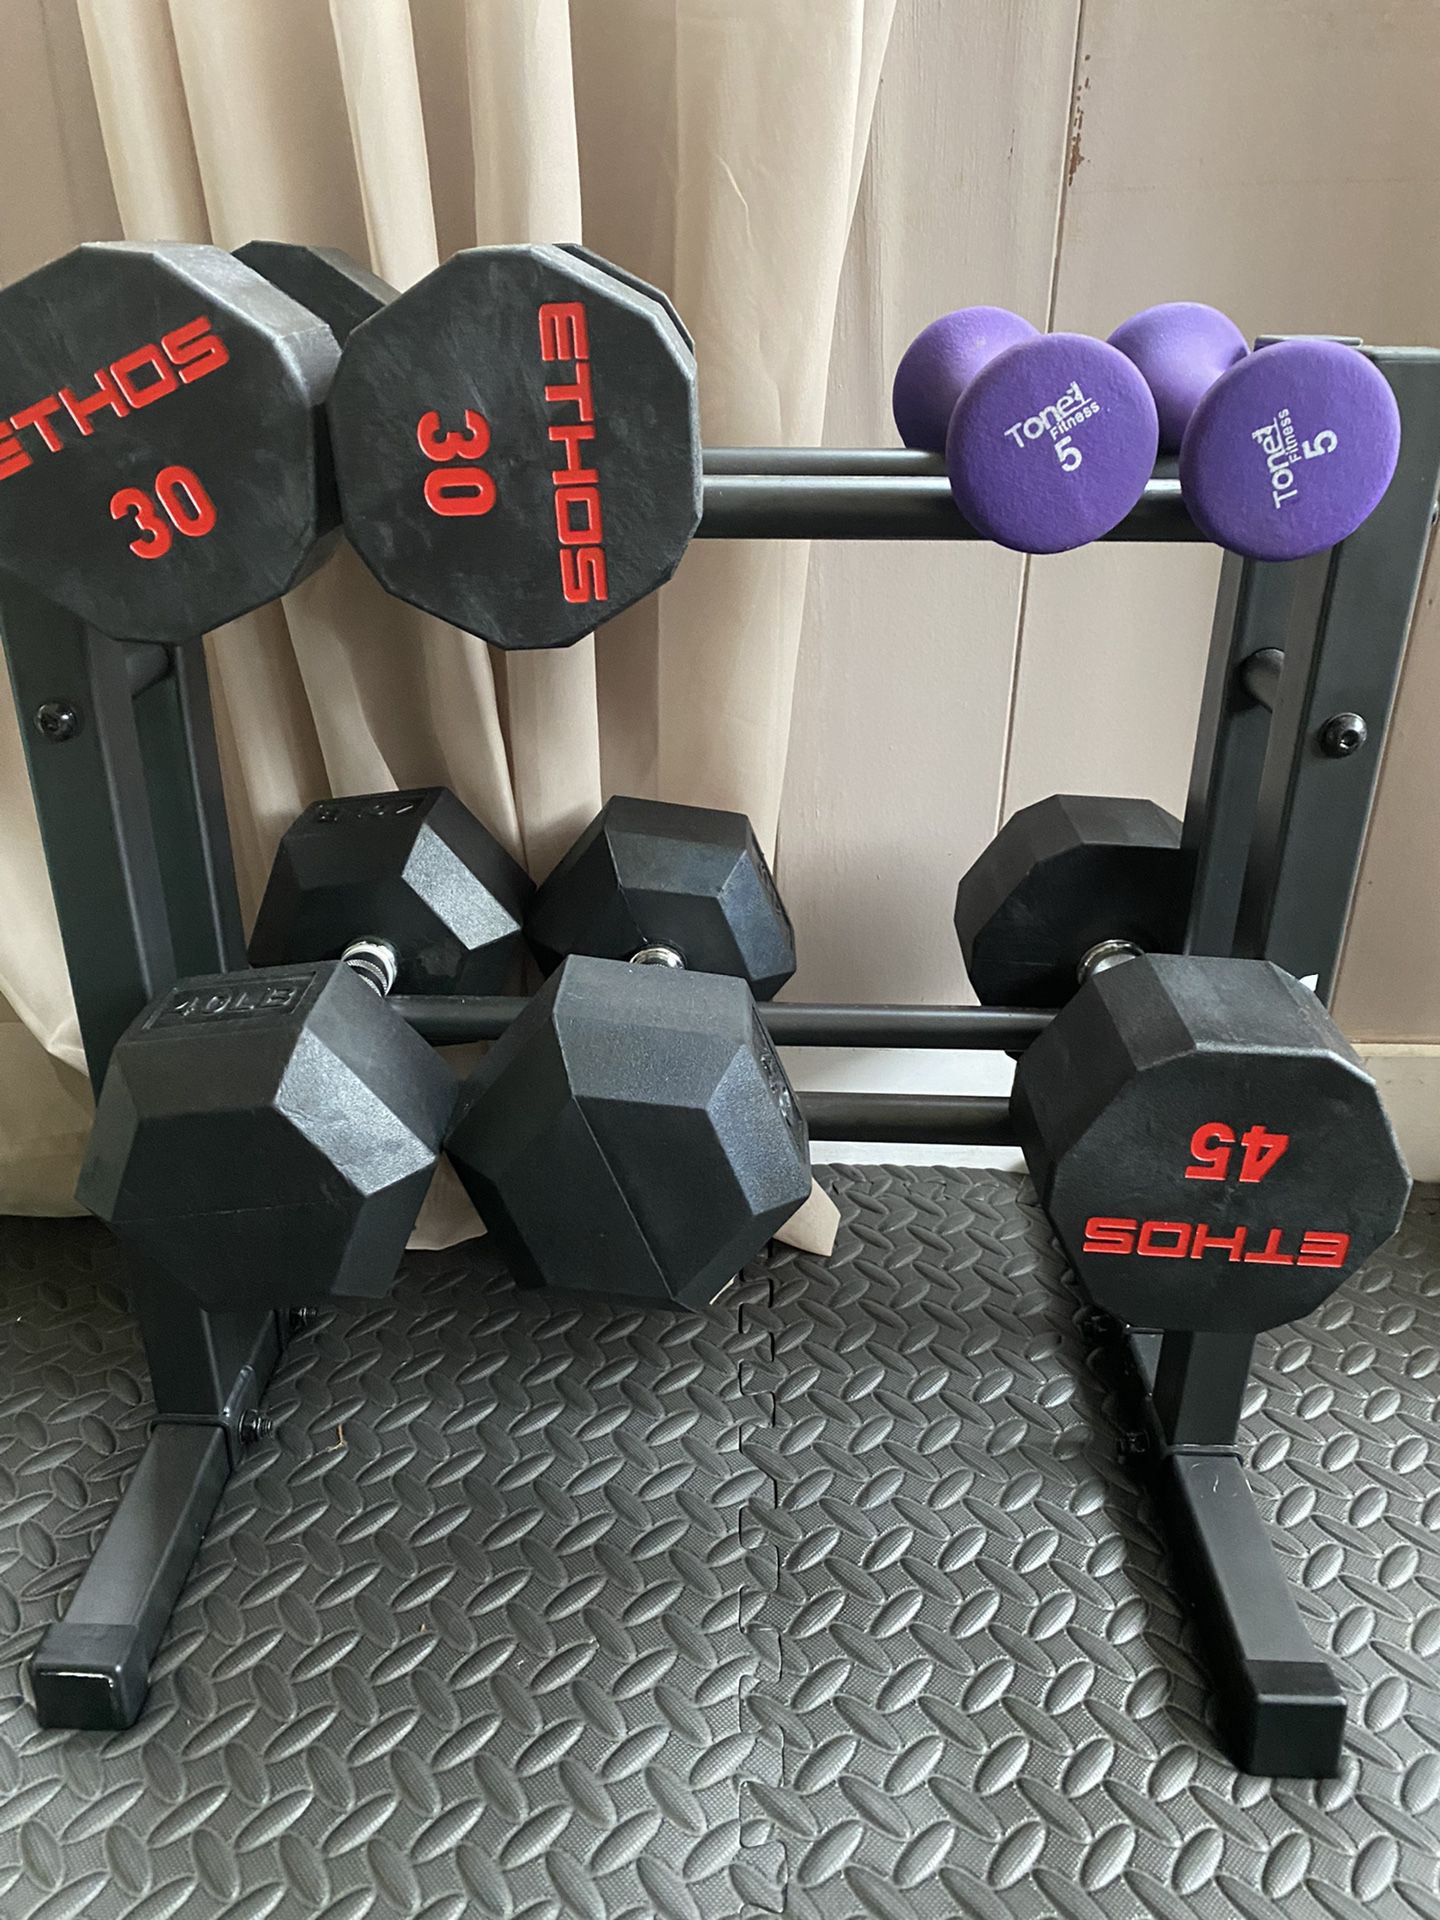 Weights Come With free dumbbell Rack